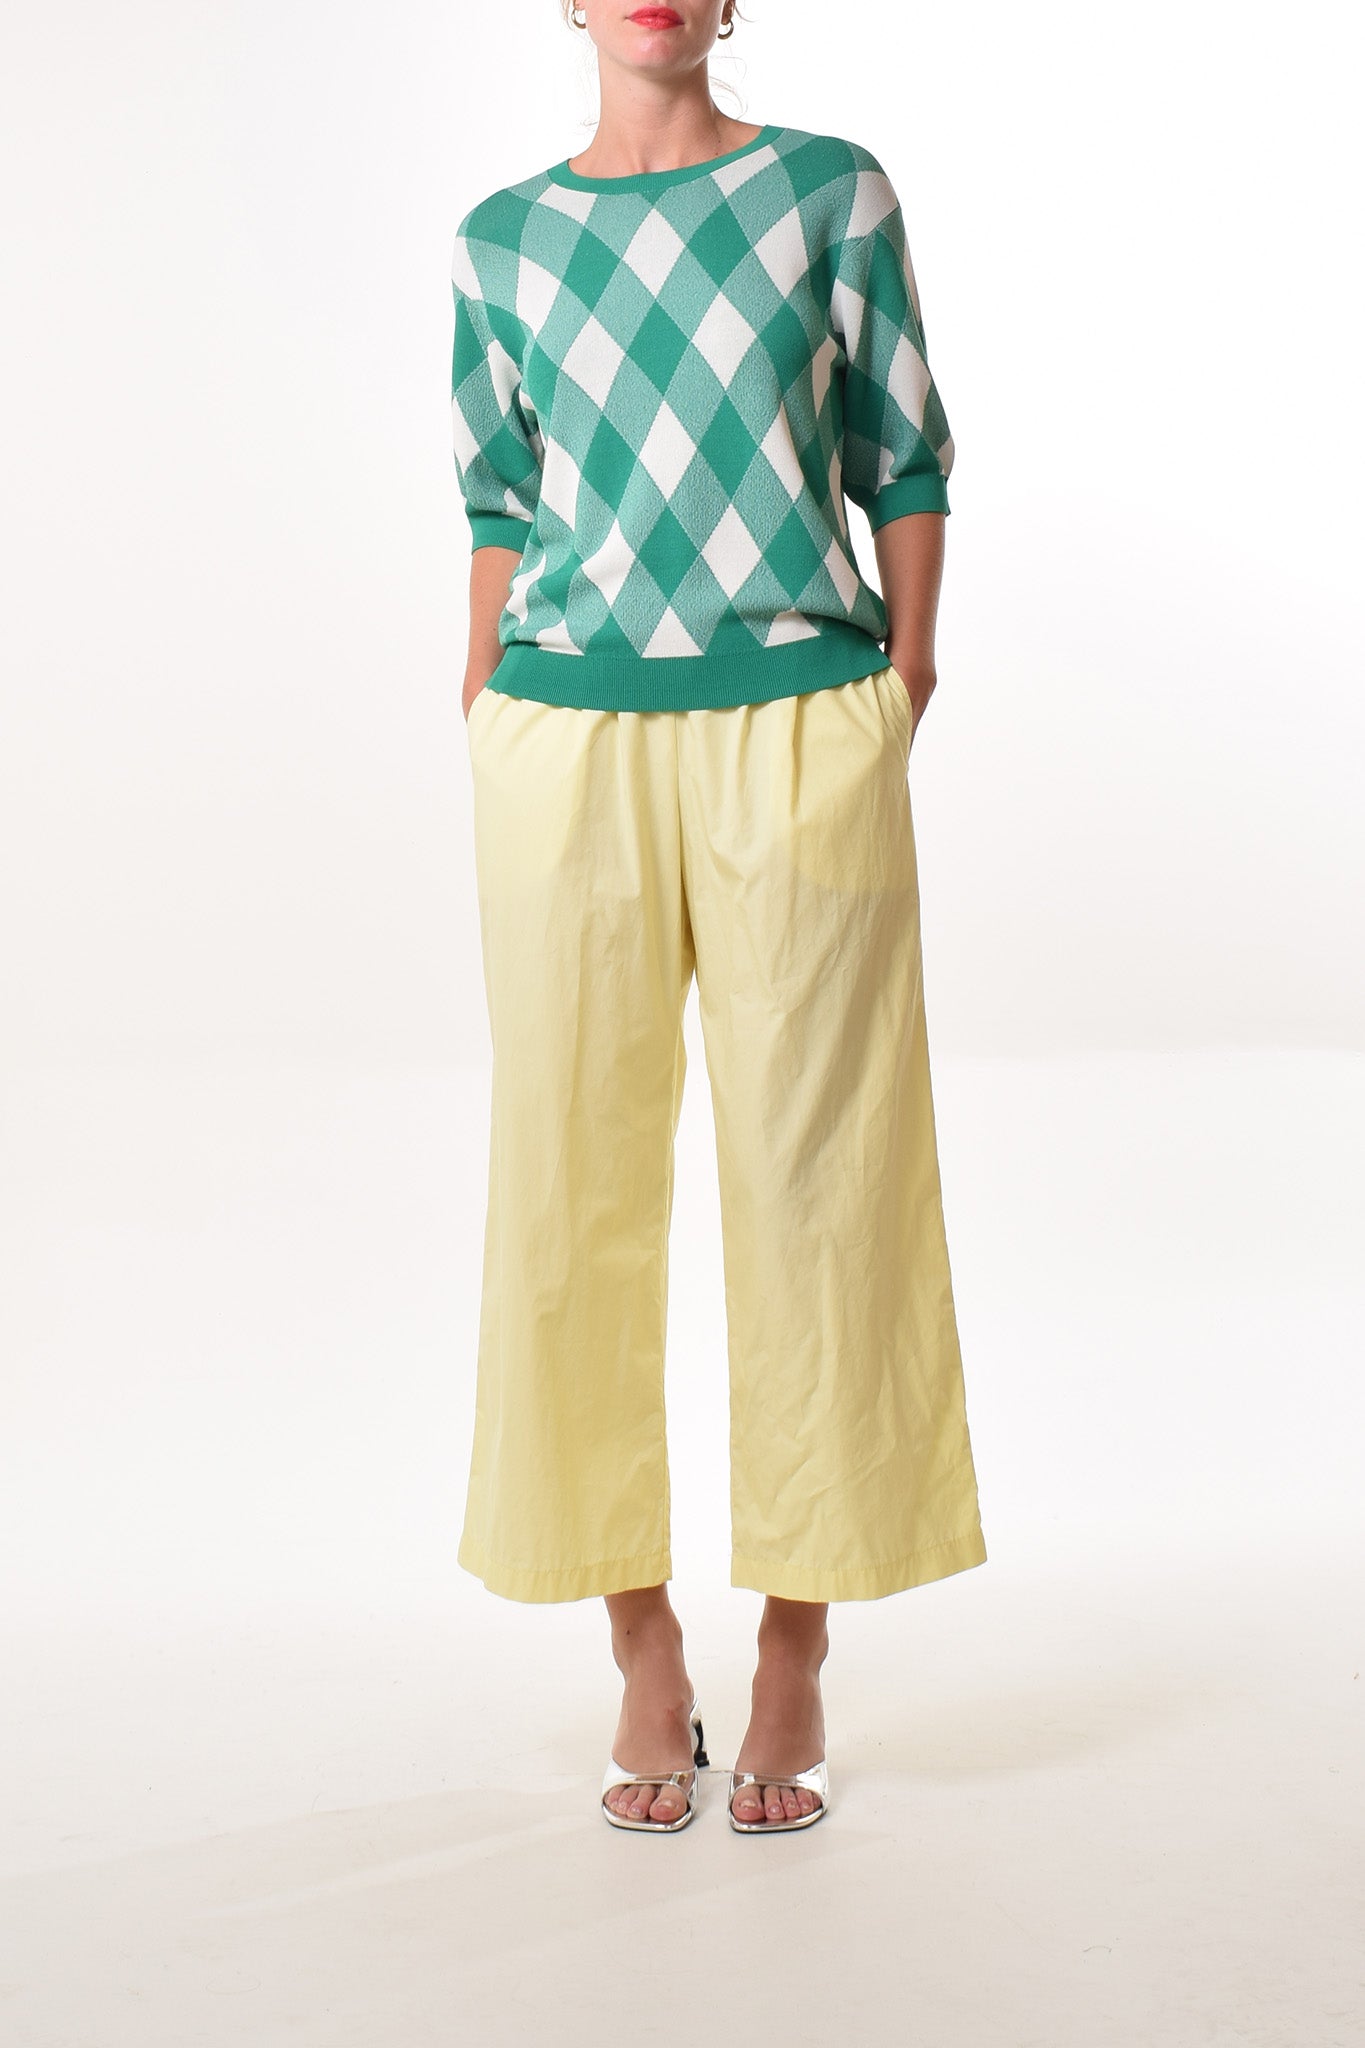 Memphis trousers in Yellow (mid-weight)